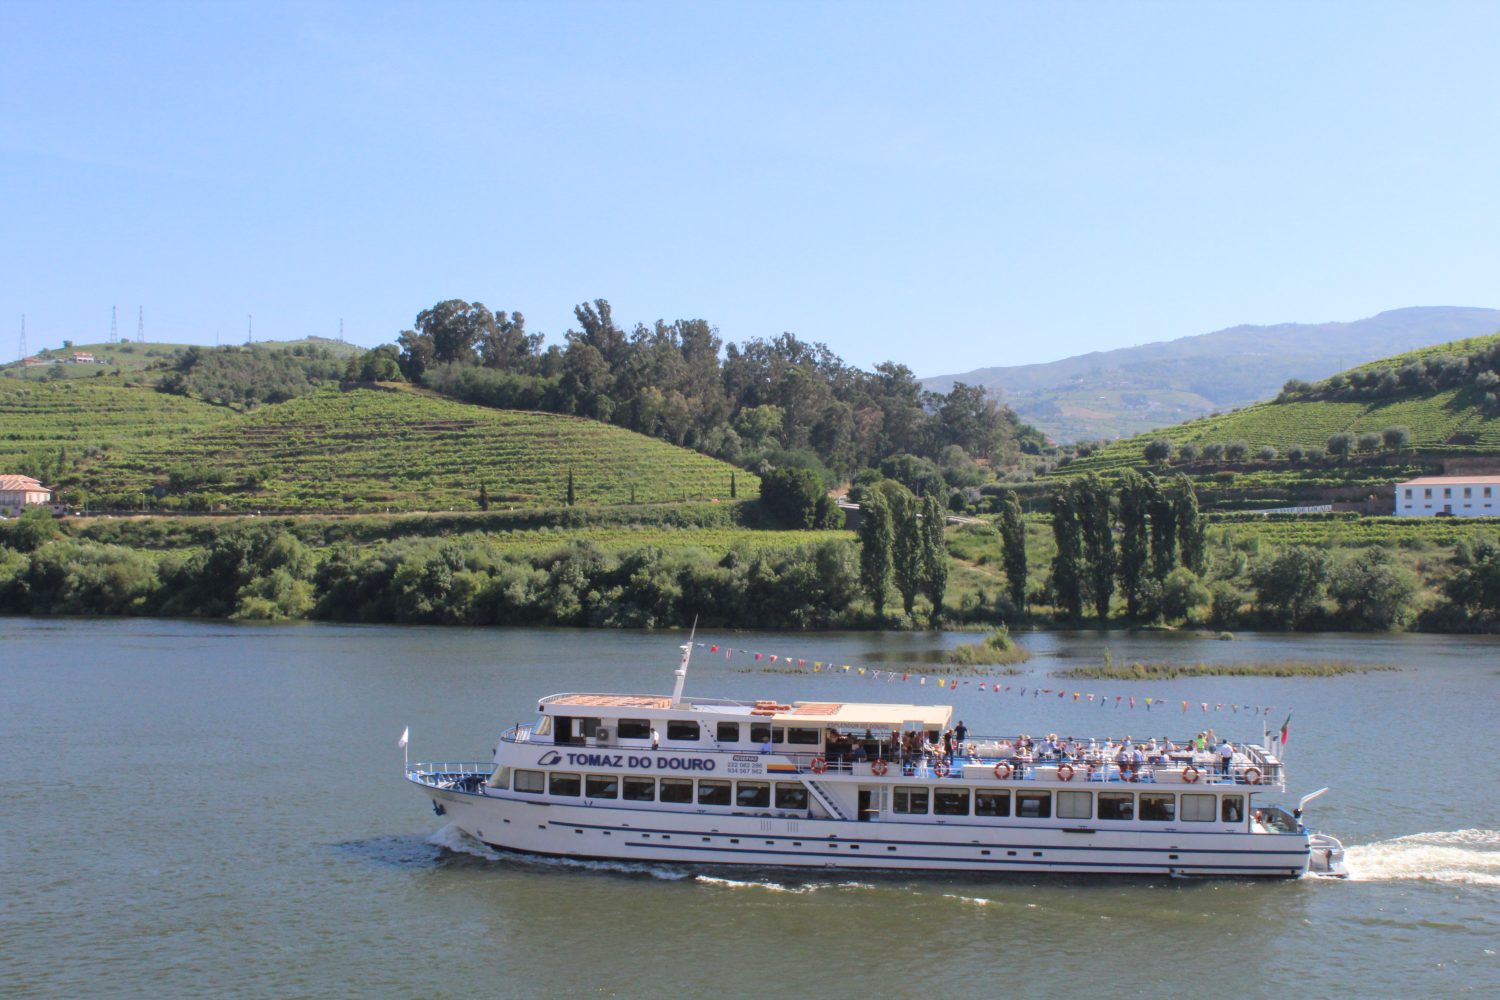 Boat in the Douro River at Regua